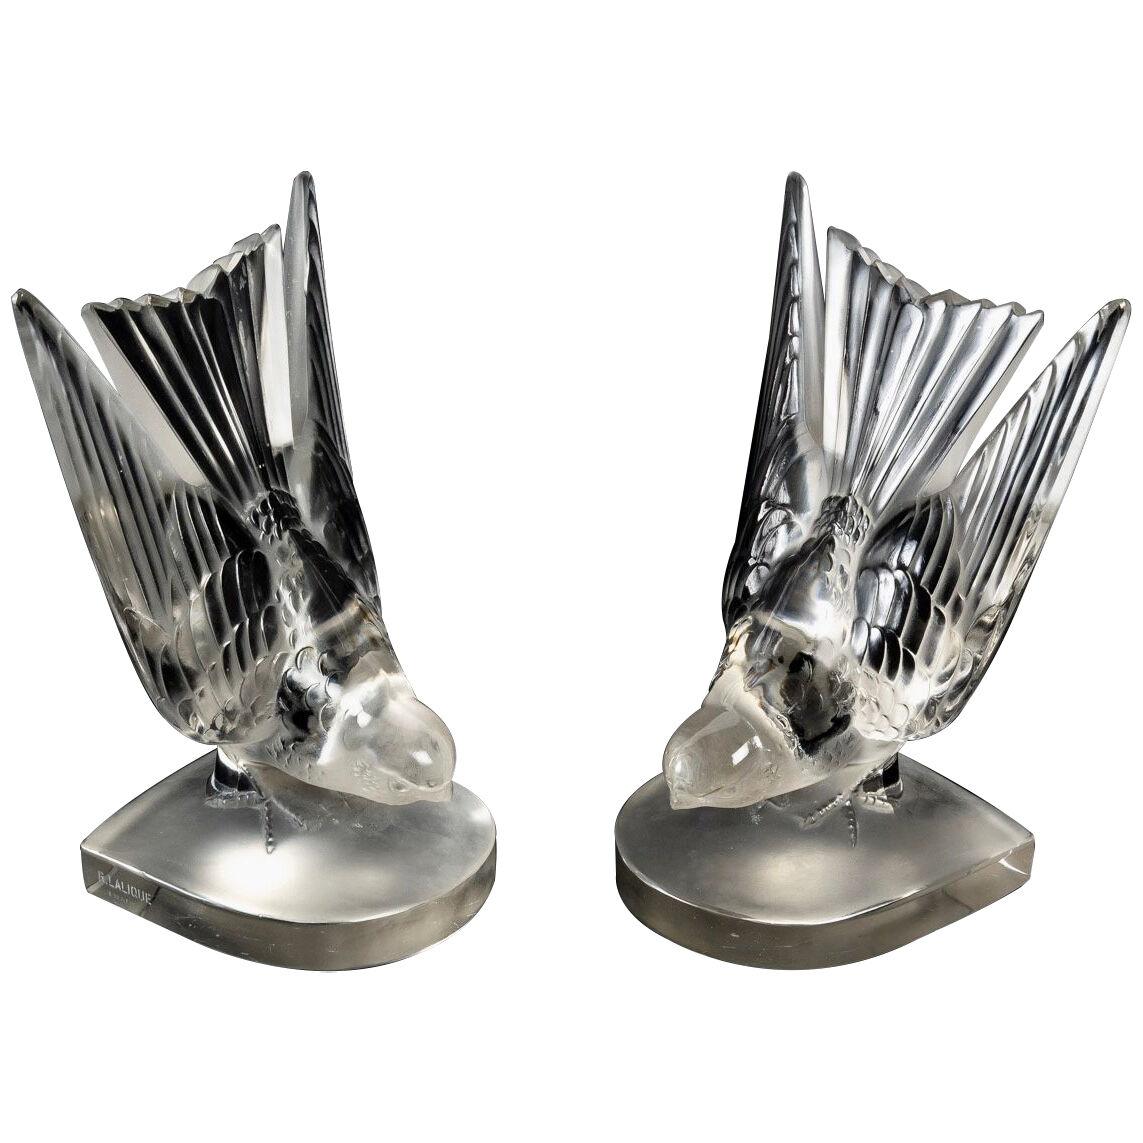 1942 René Lalique - Pair Of Bookends Hirondelles B Frosted Glass